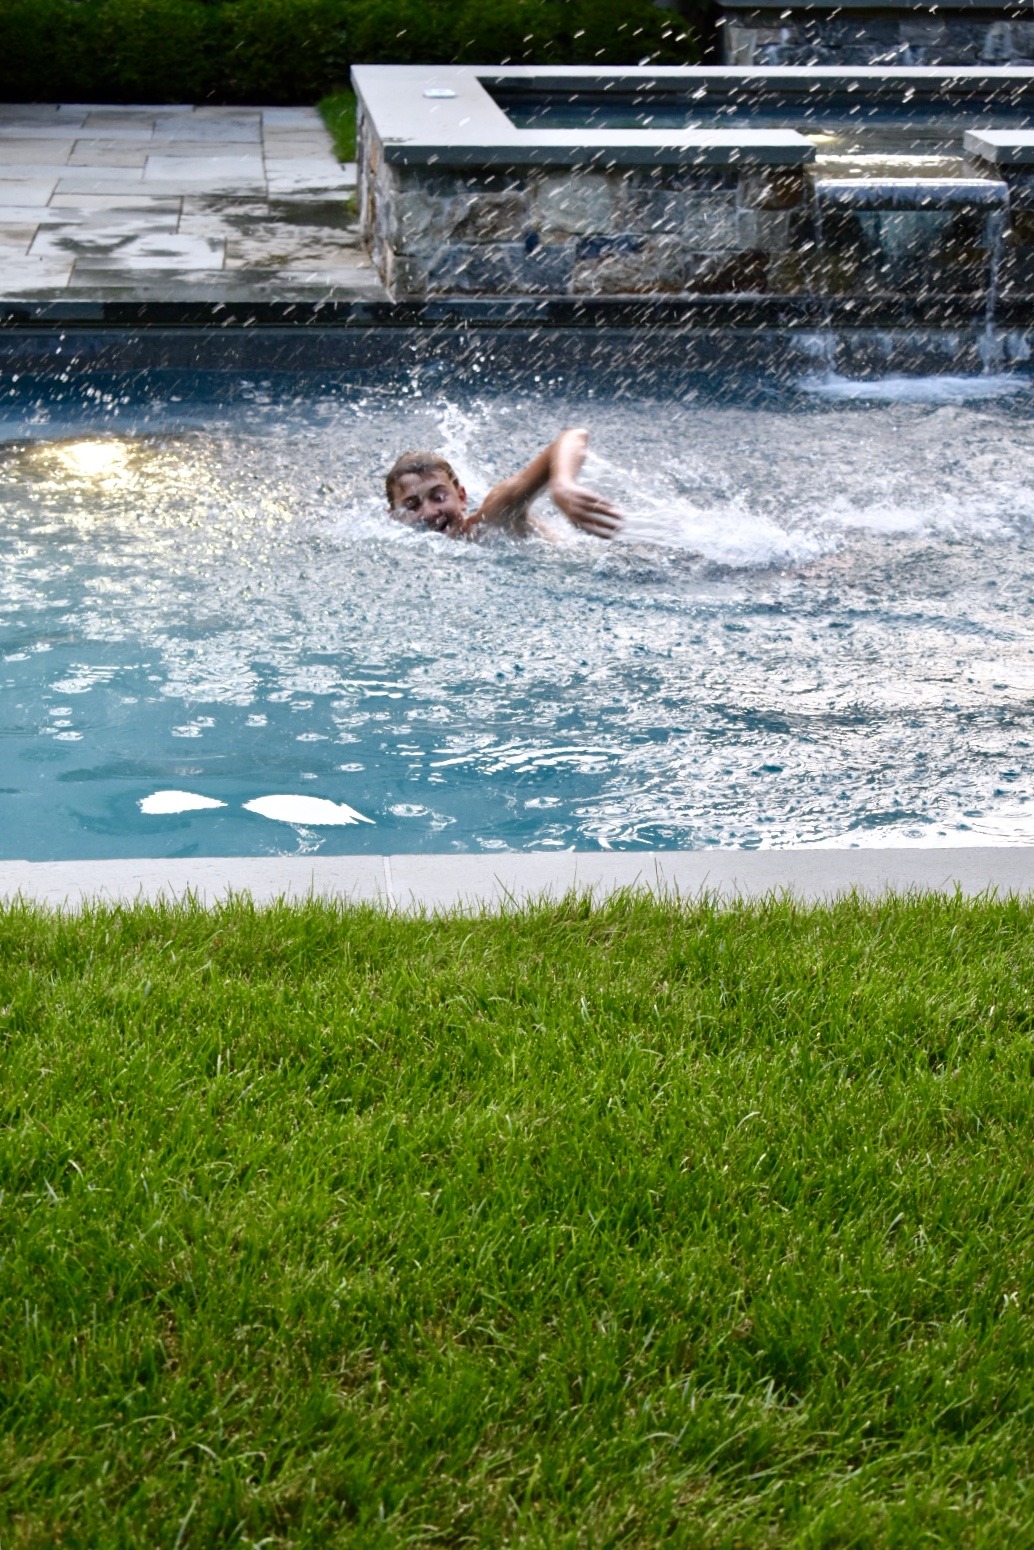 A person splashes into a pool, creating a dynamic water disturbance, against a backdrop of green grass and a water feature with cascading steps.